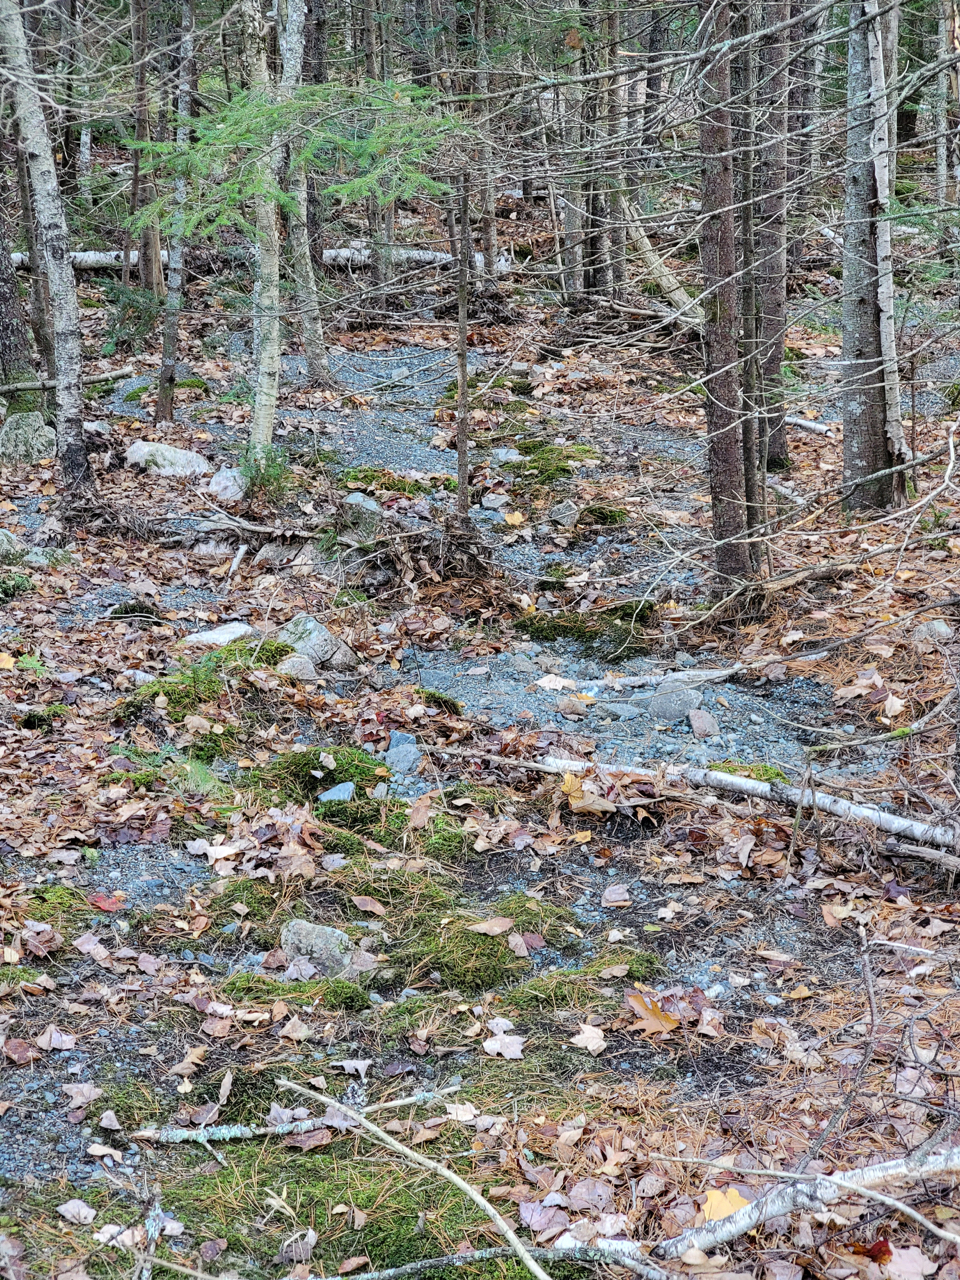 Piles of gravel cover the forest floor.